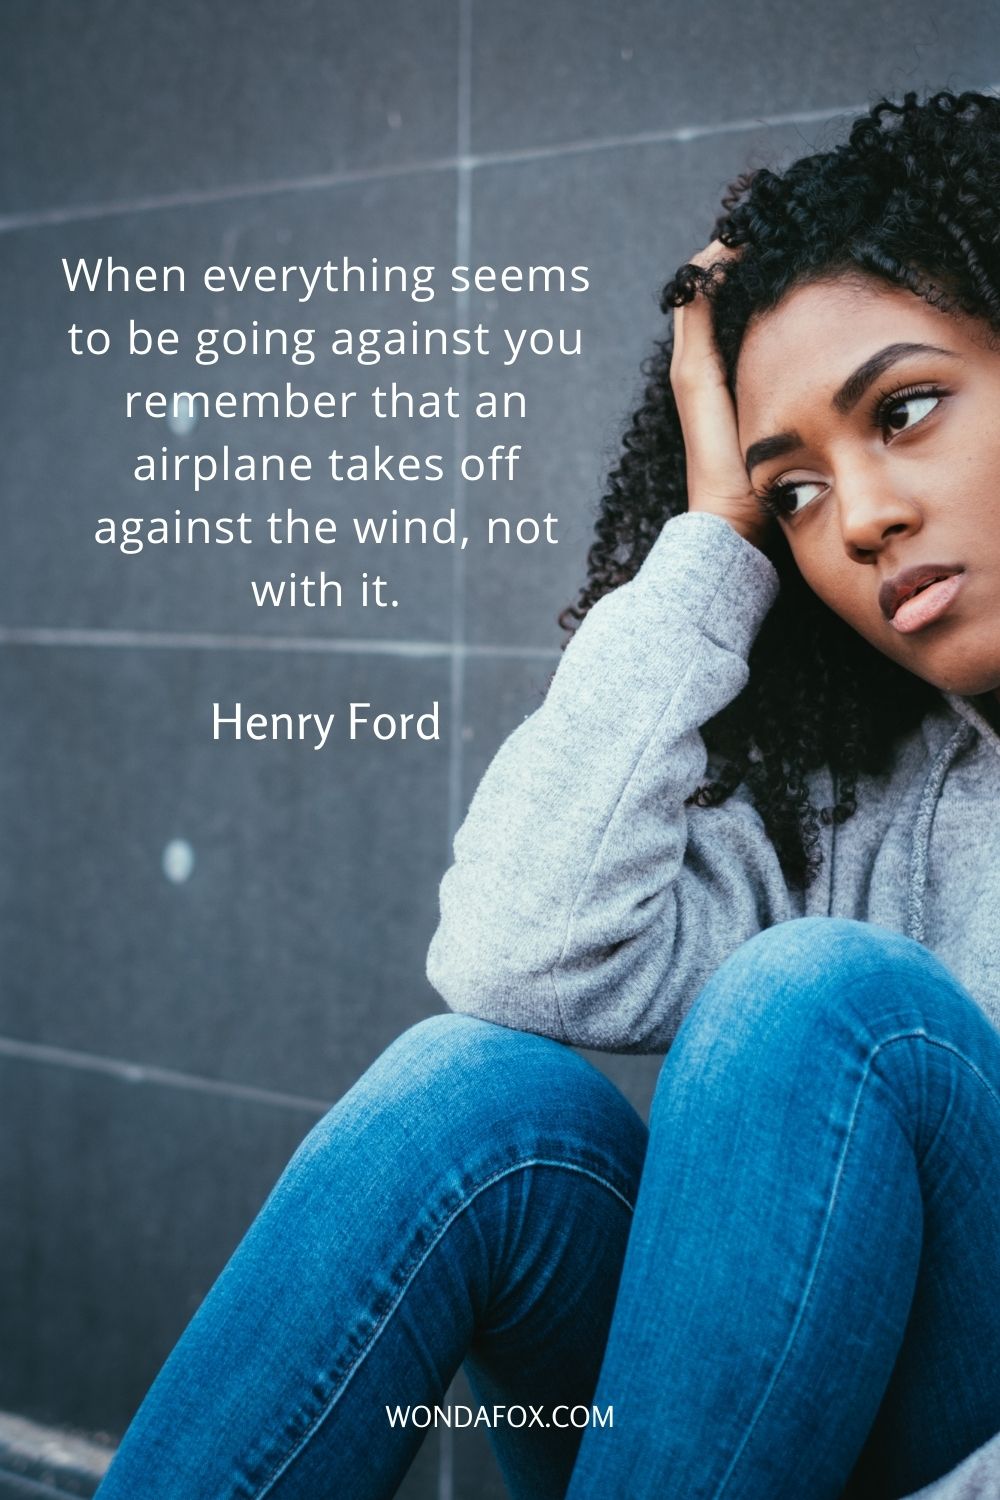 When everything seems to be going against you remember that an airplane takes off against the wind, not with it.